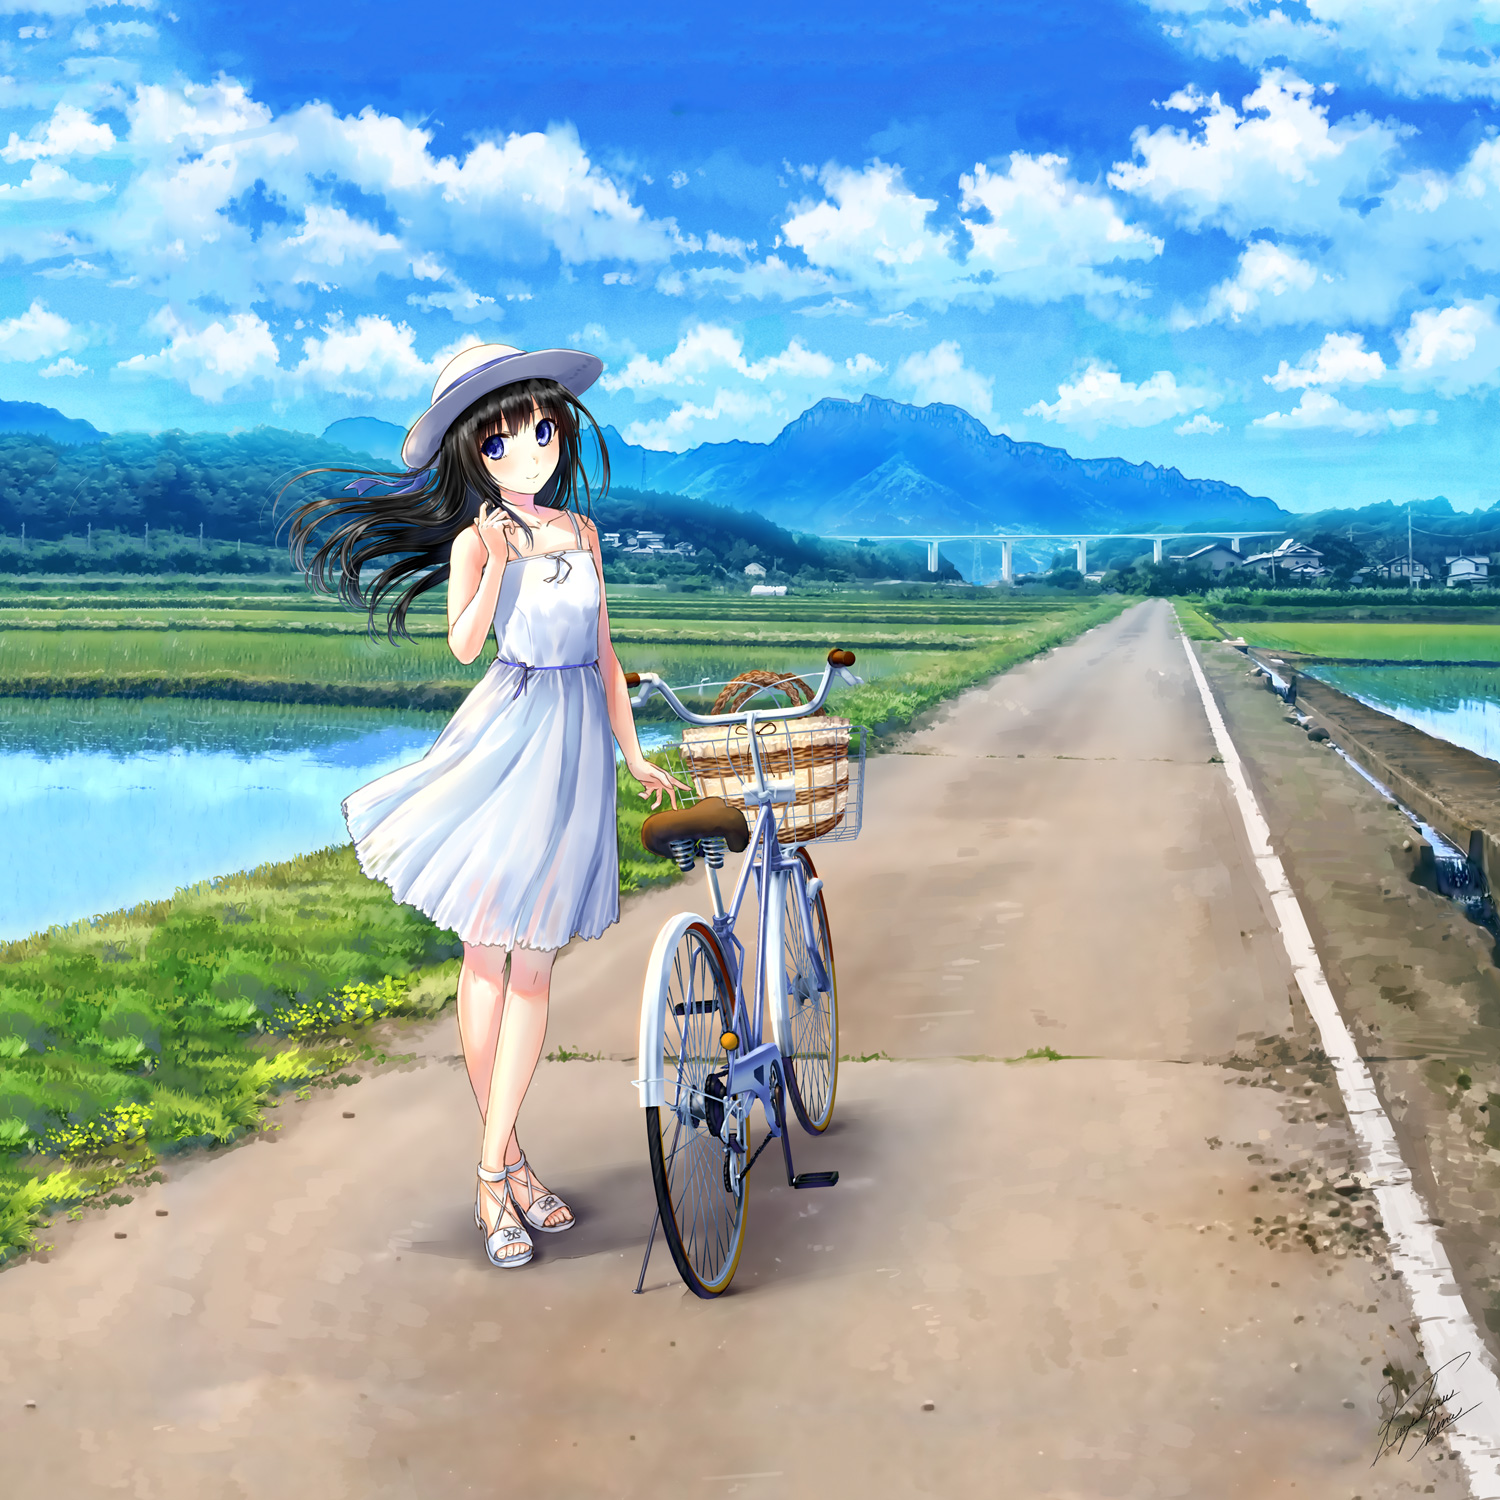 Anime Girls Portrait Display White Dress Feet Crossed Dress Looking At Viewer Bicycle Women Outdoors 1500x1500